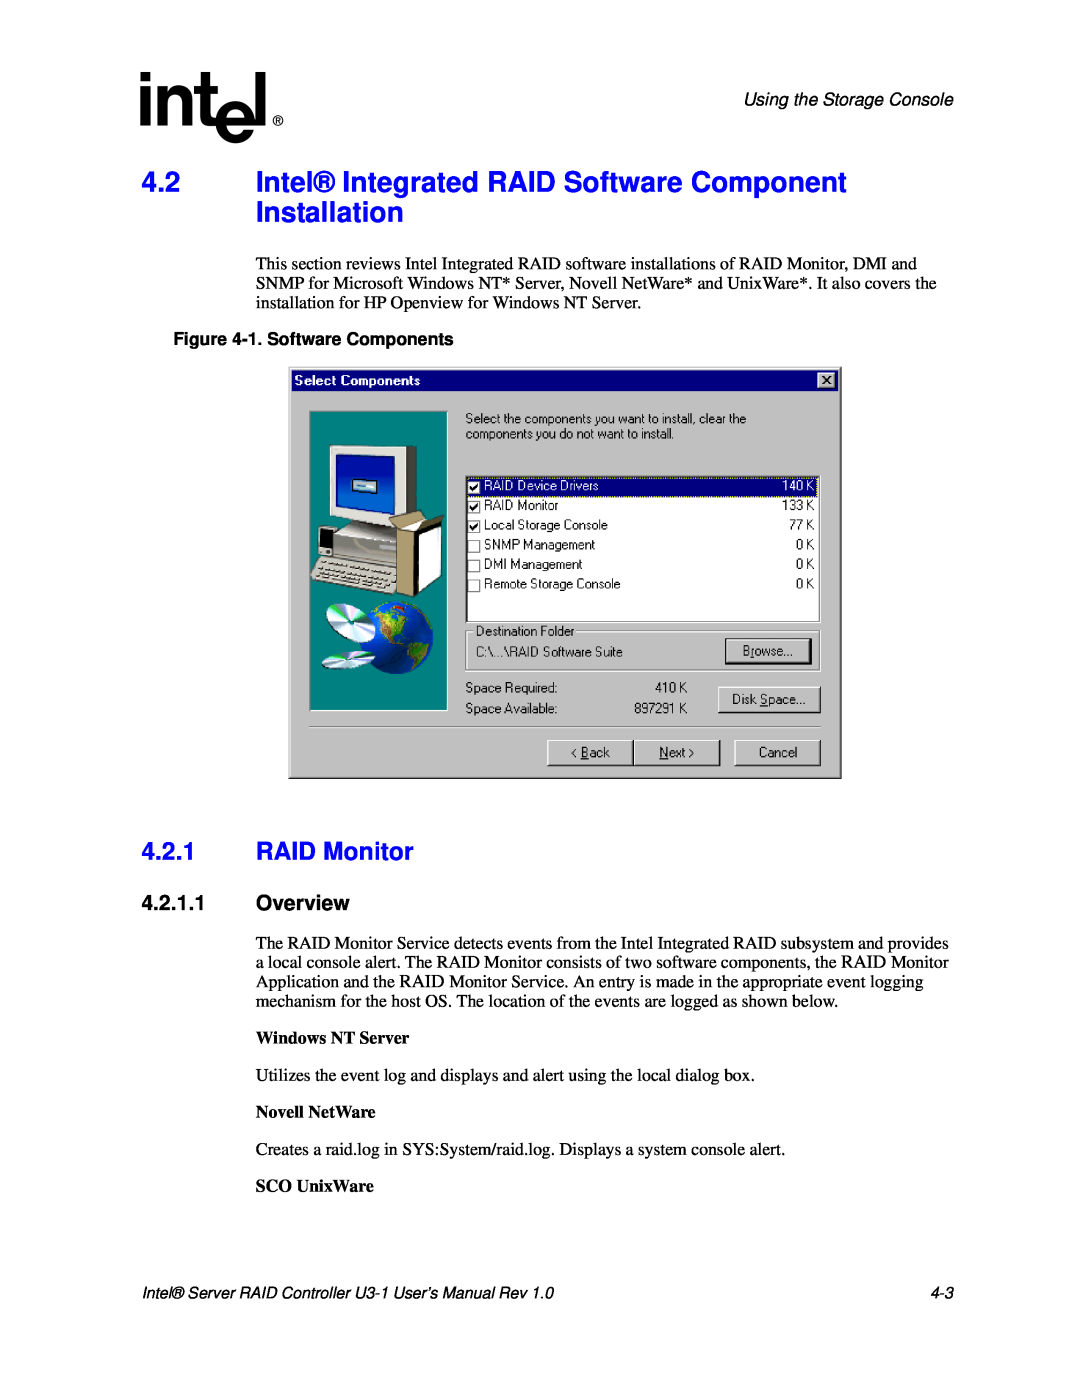 Intel SRCU31 4.2.1.1Overview, Using the Storage Console, 1.Software Components, Windows NT Server, Novell NetWare 